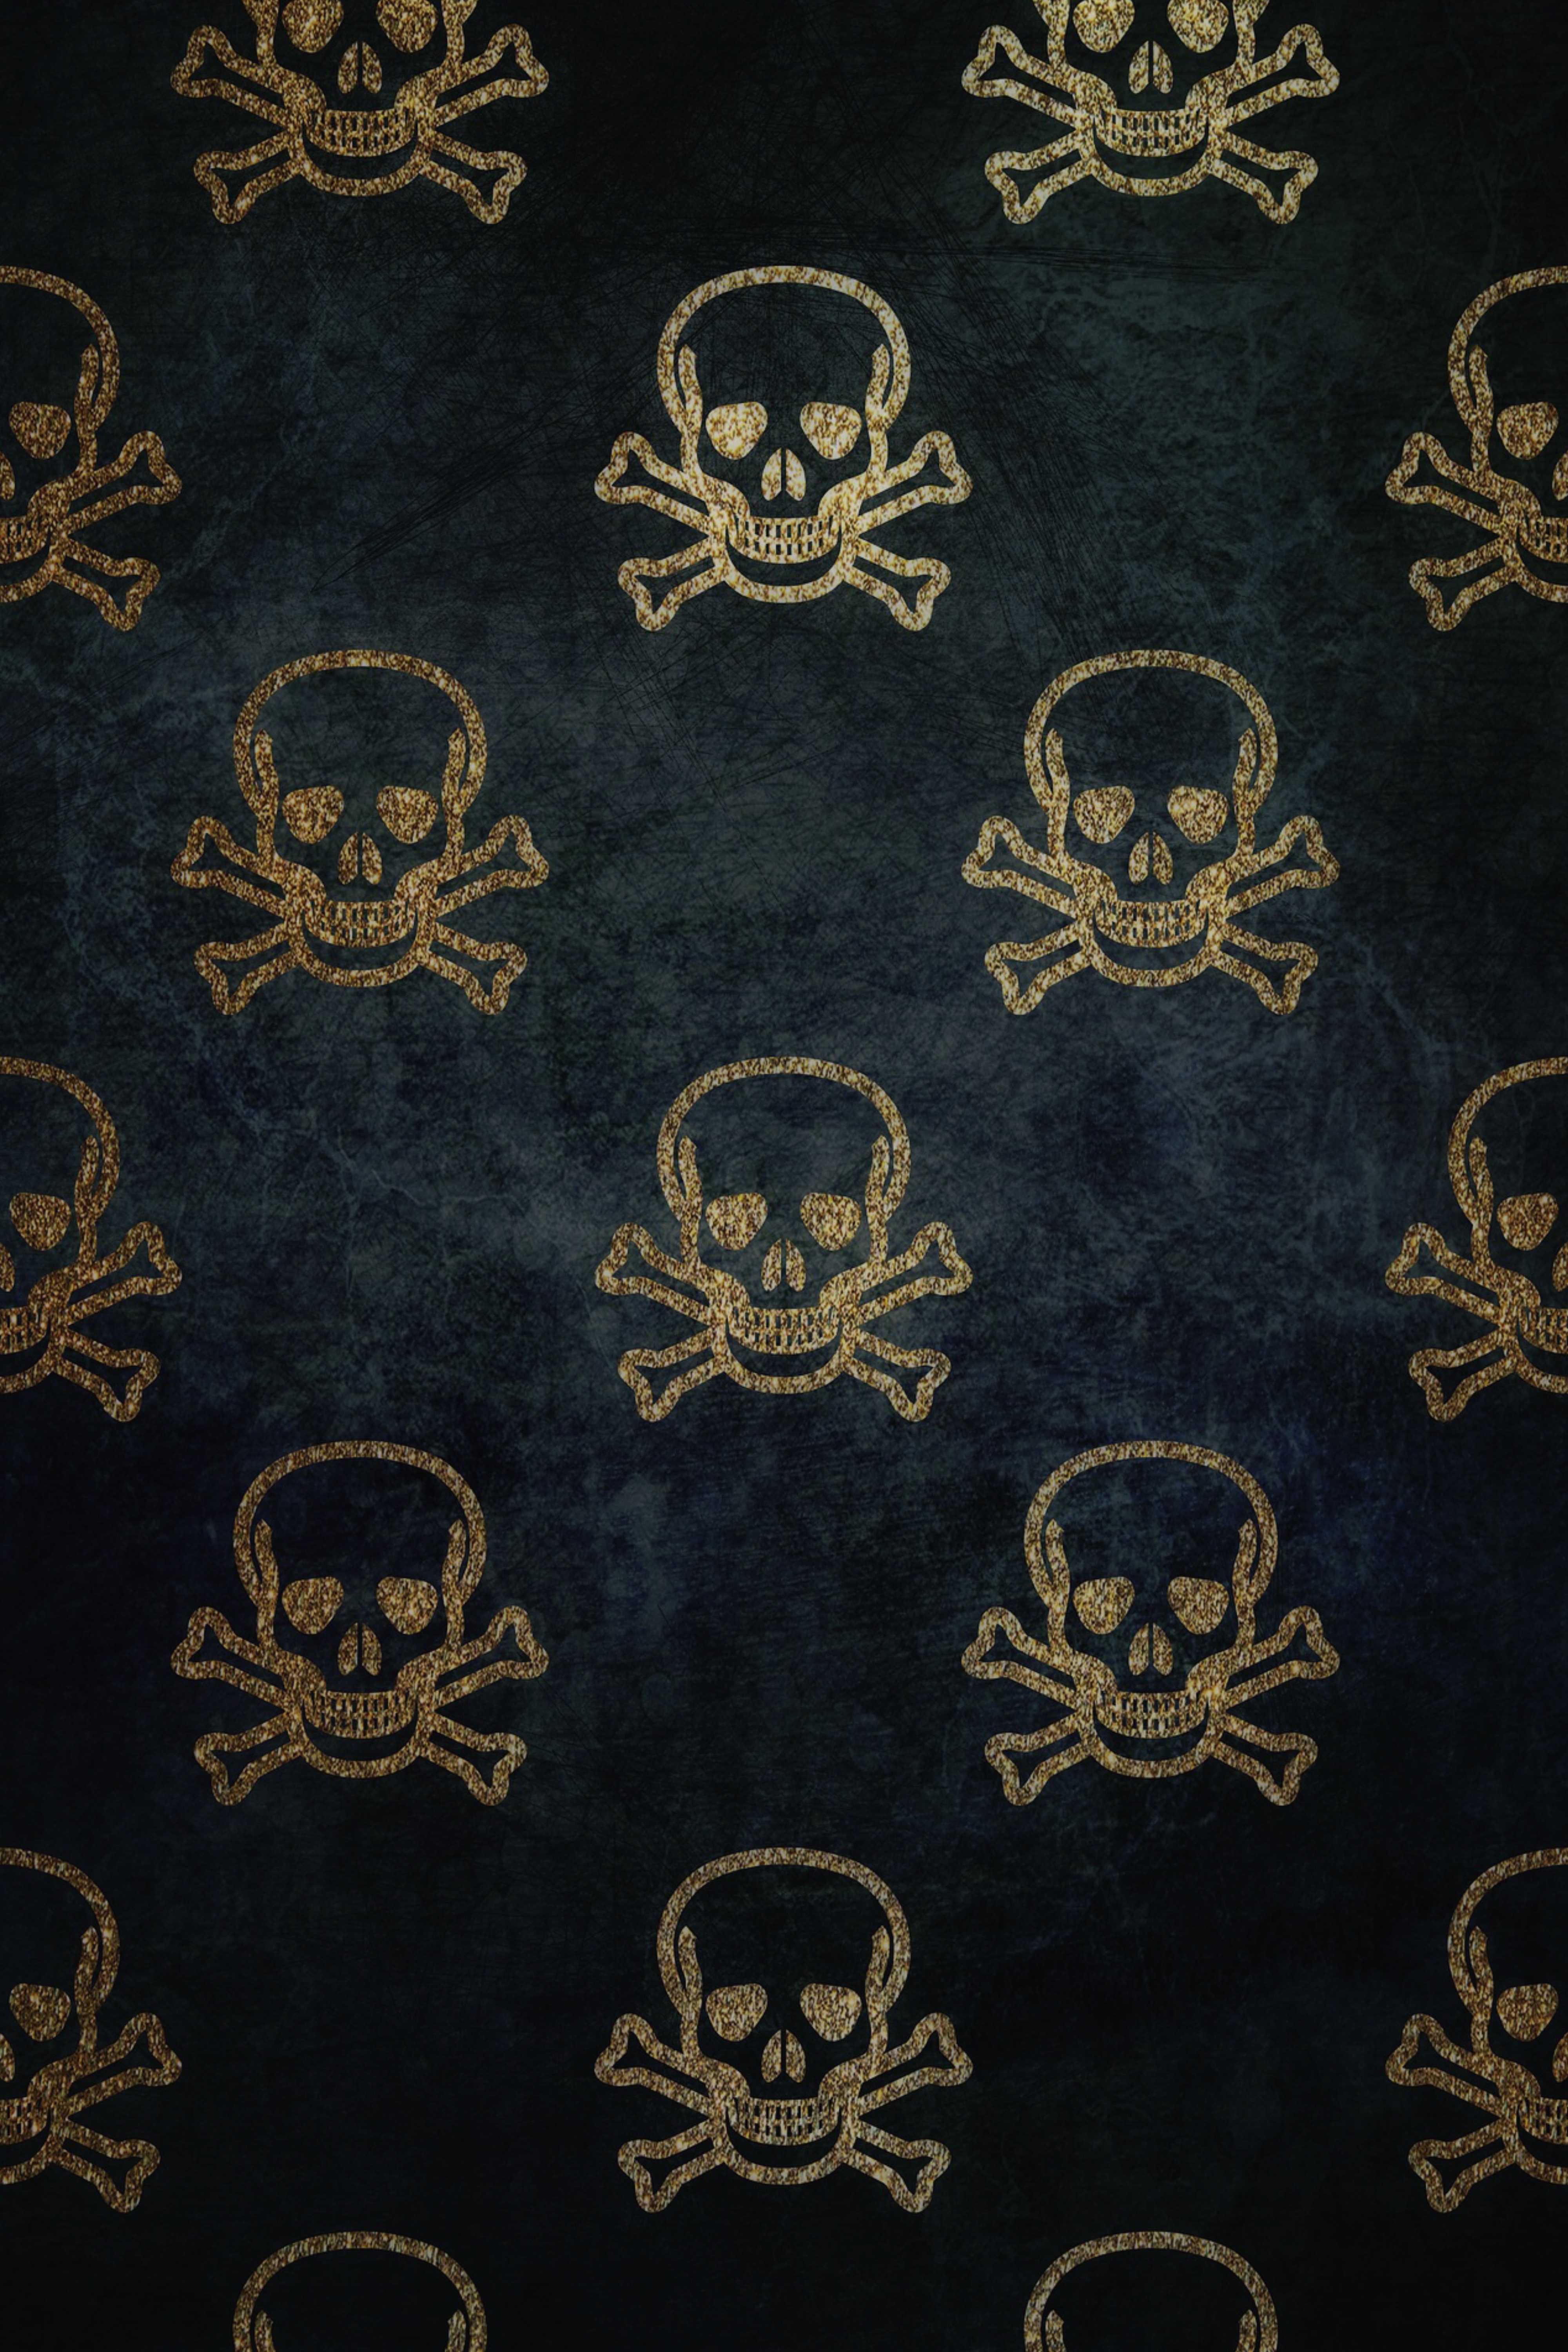 Cool Backgrounds textures, patterns, skull, gold Texture